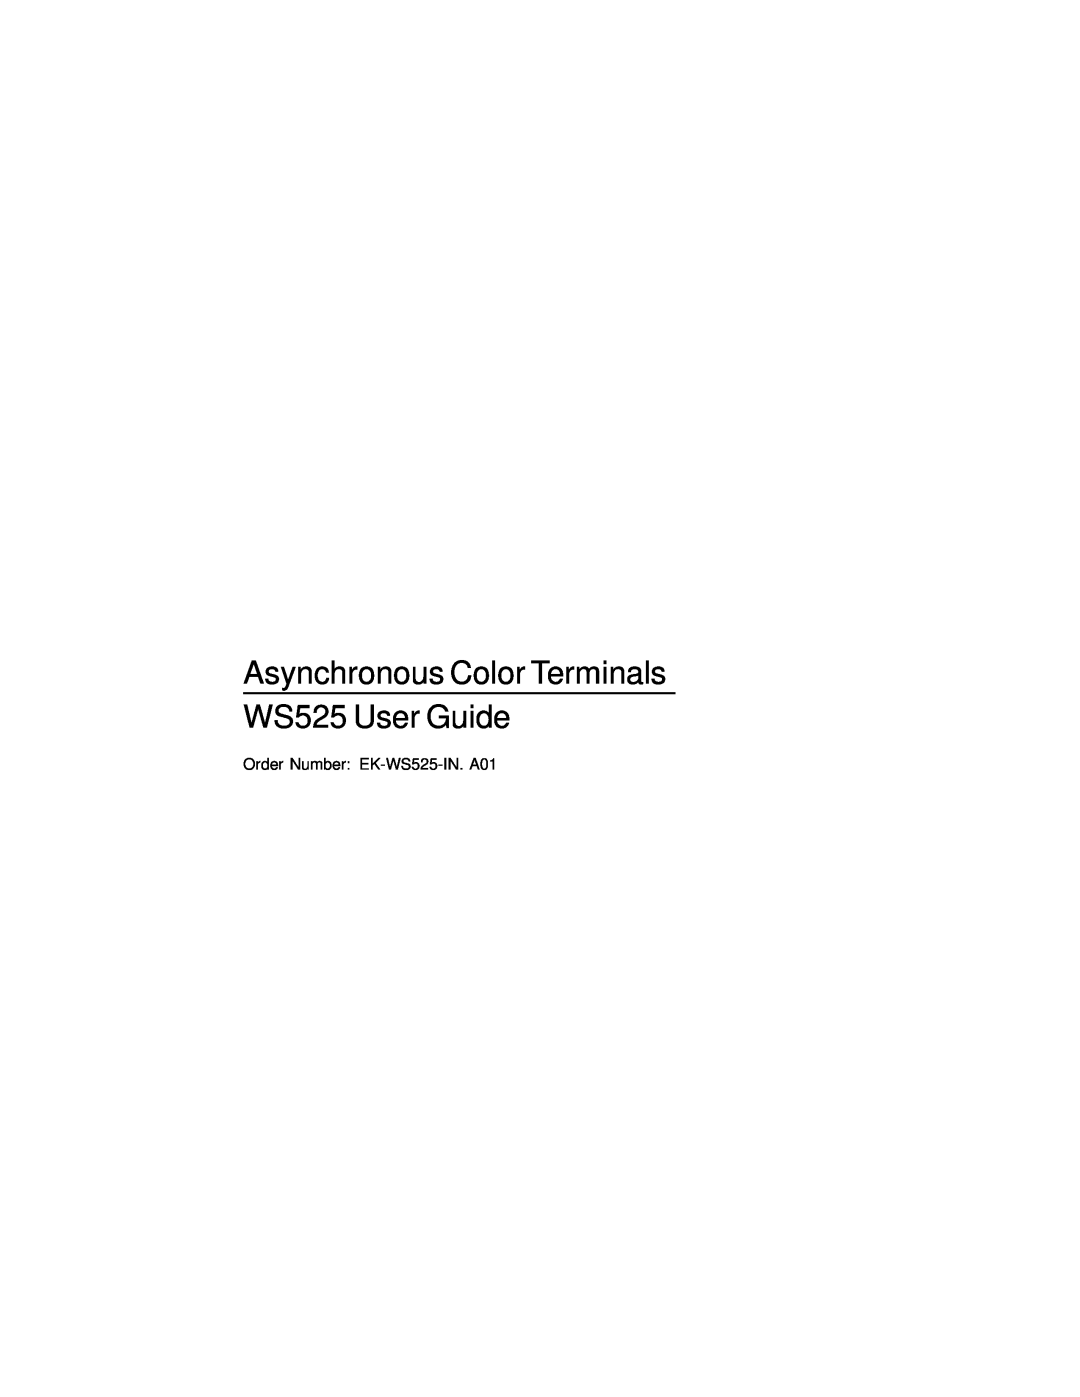 IBM manual Asynchronous Color Terminals WS525 User Guide, Order Number EK-WS525-IN. A01 